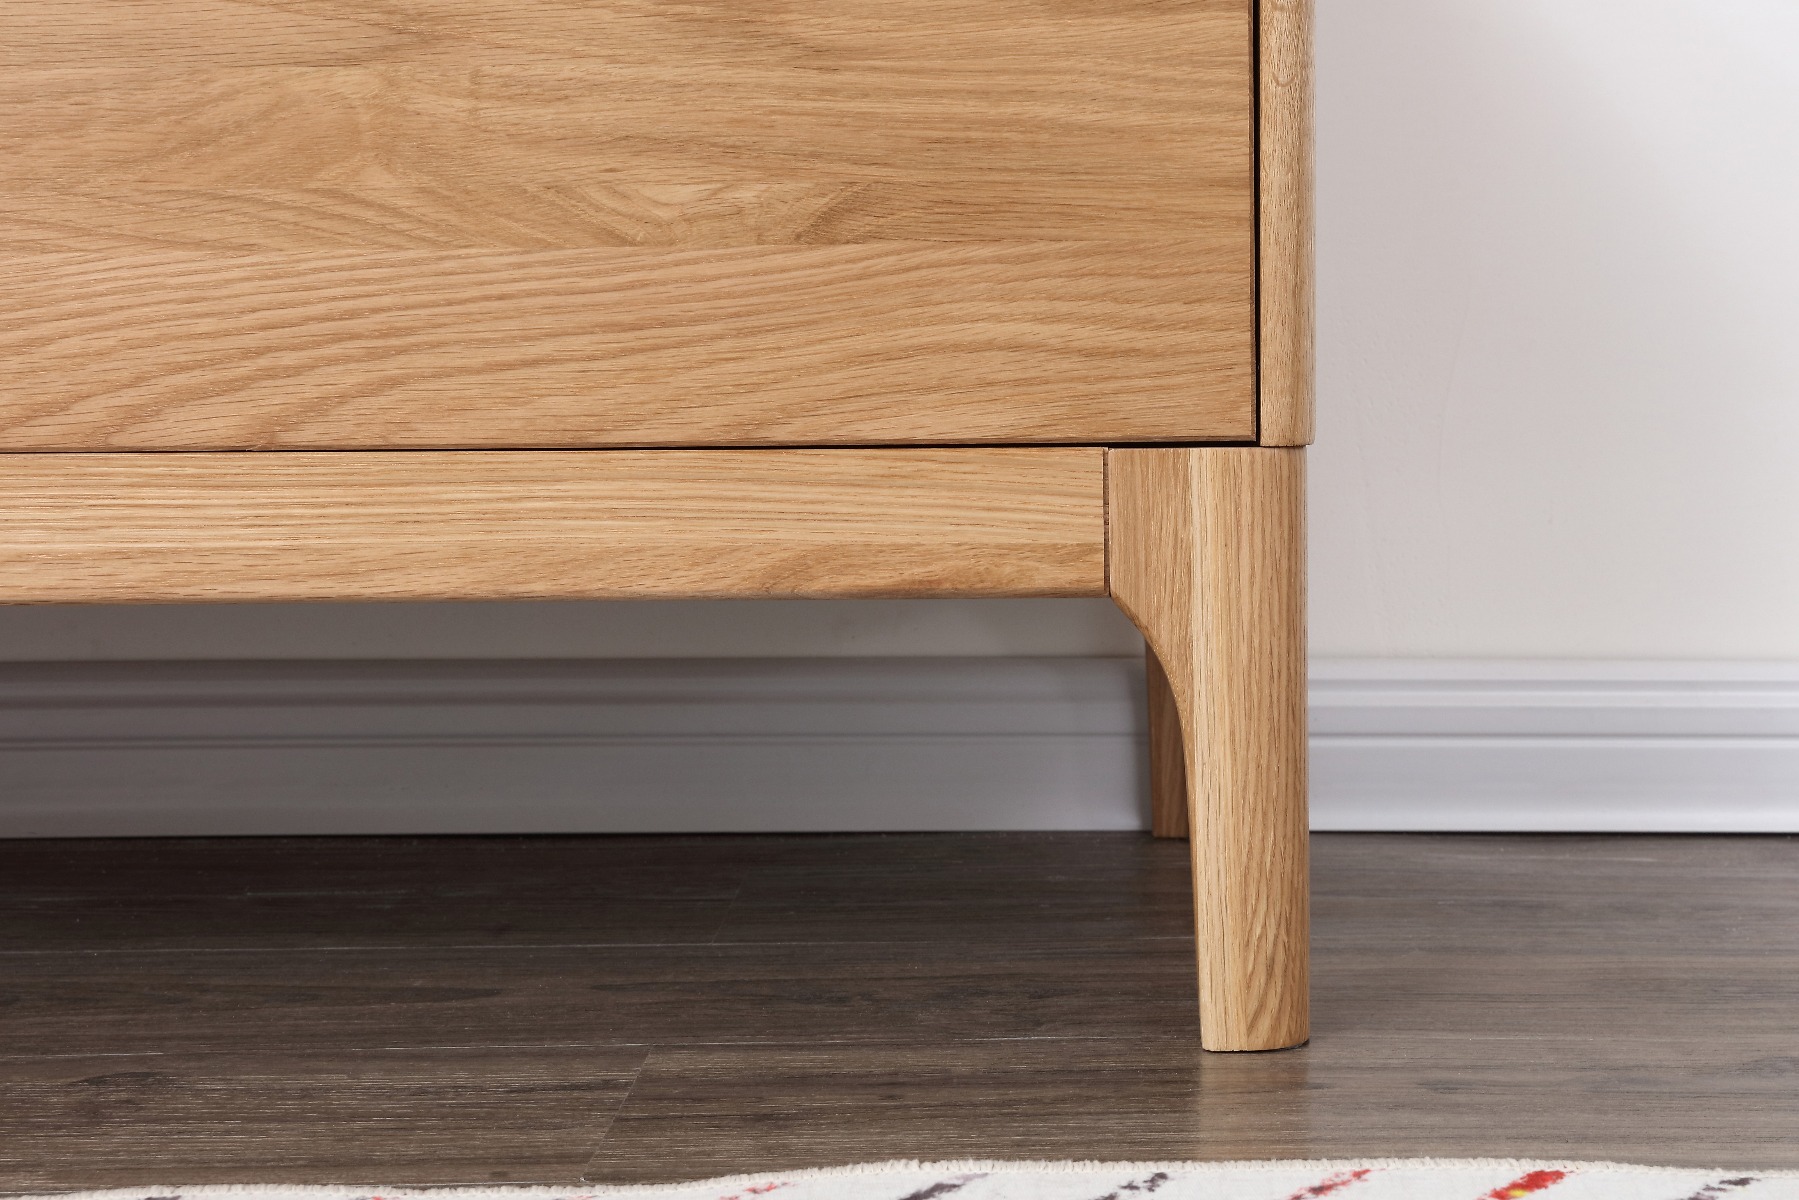 Supported by curved solid oakwood legs. Strong and sturdy.